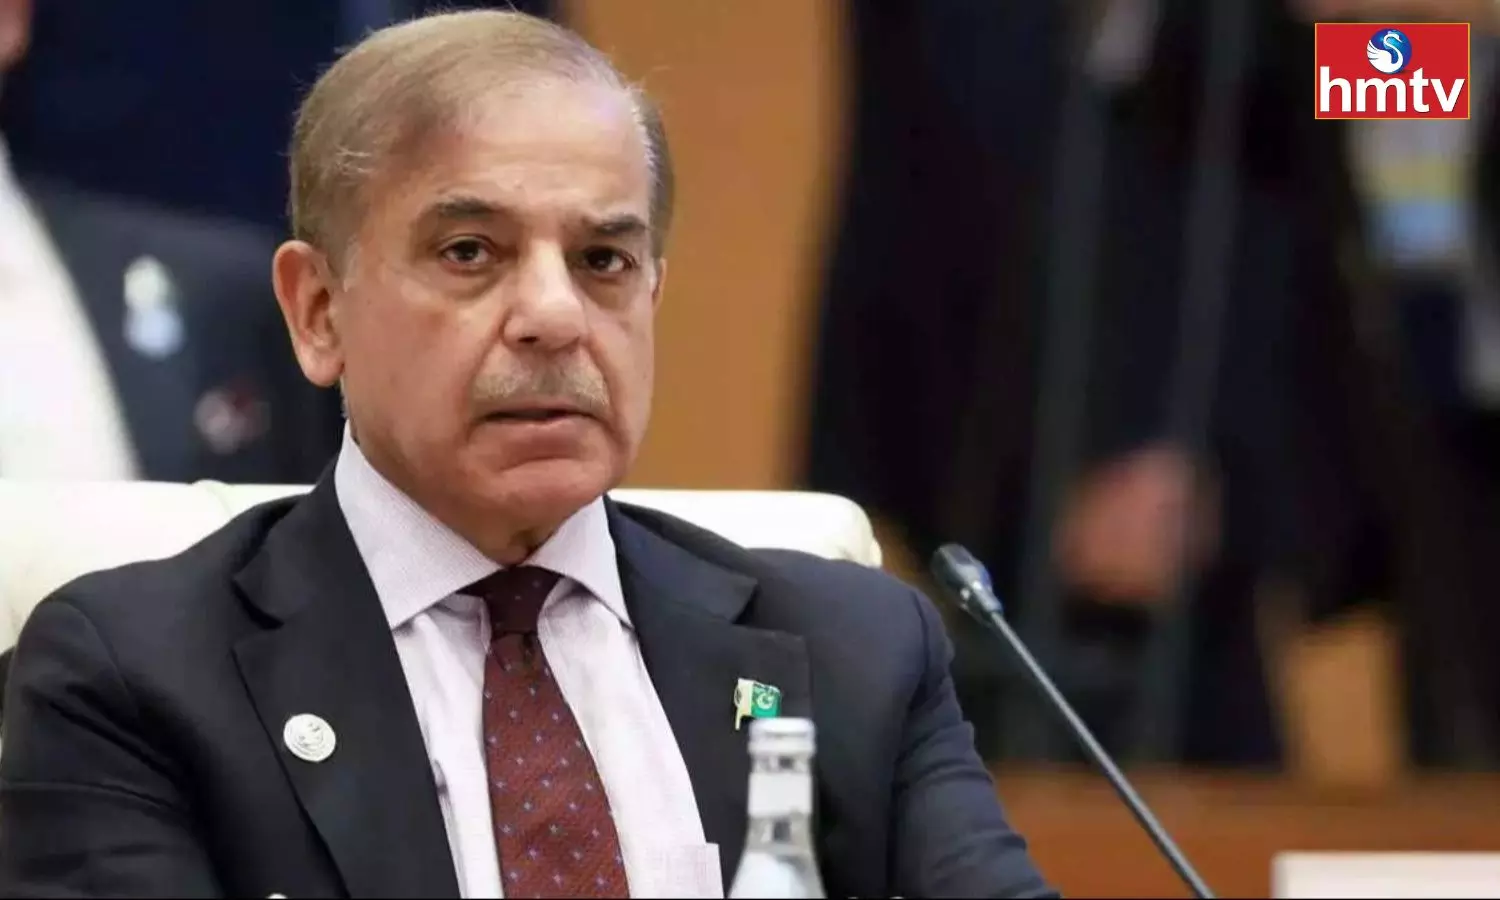 Shehbaz Sharif will take oath as the Prime Minister of Pakistan Today